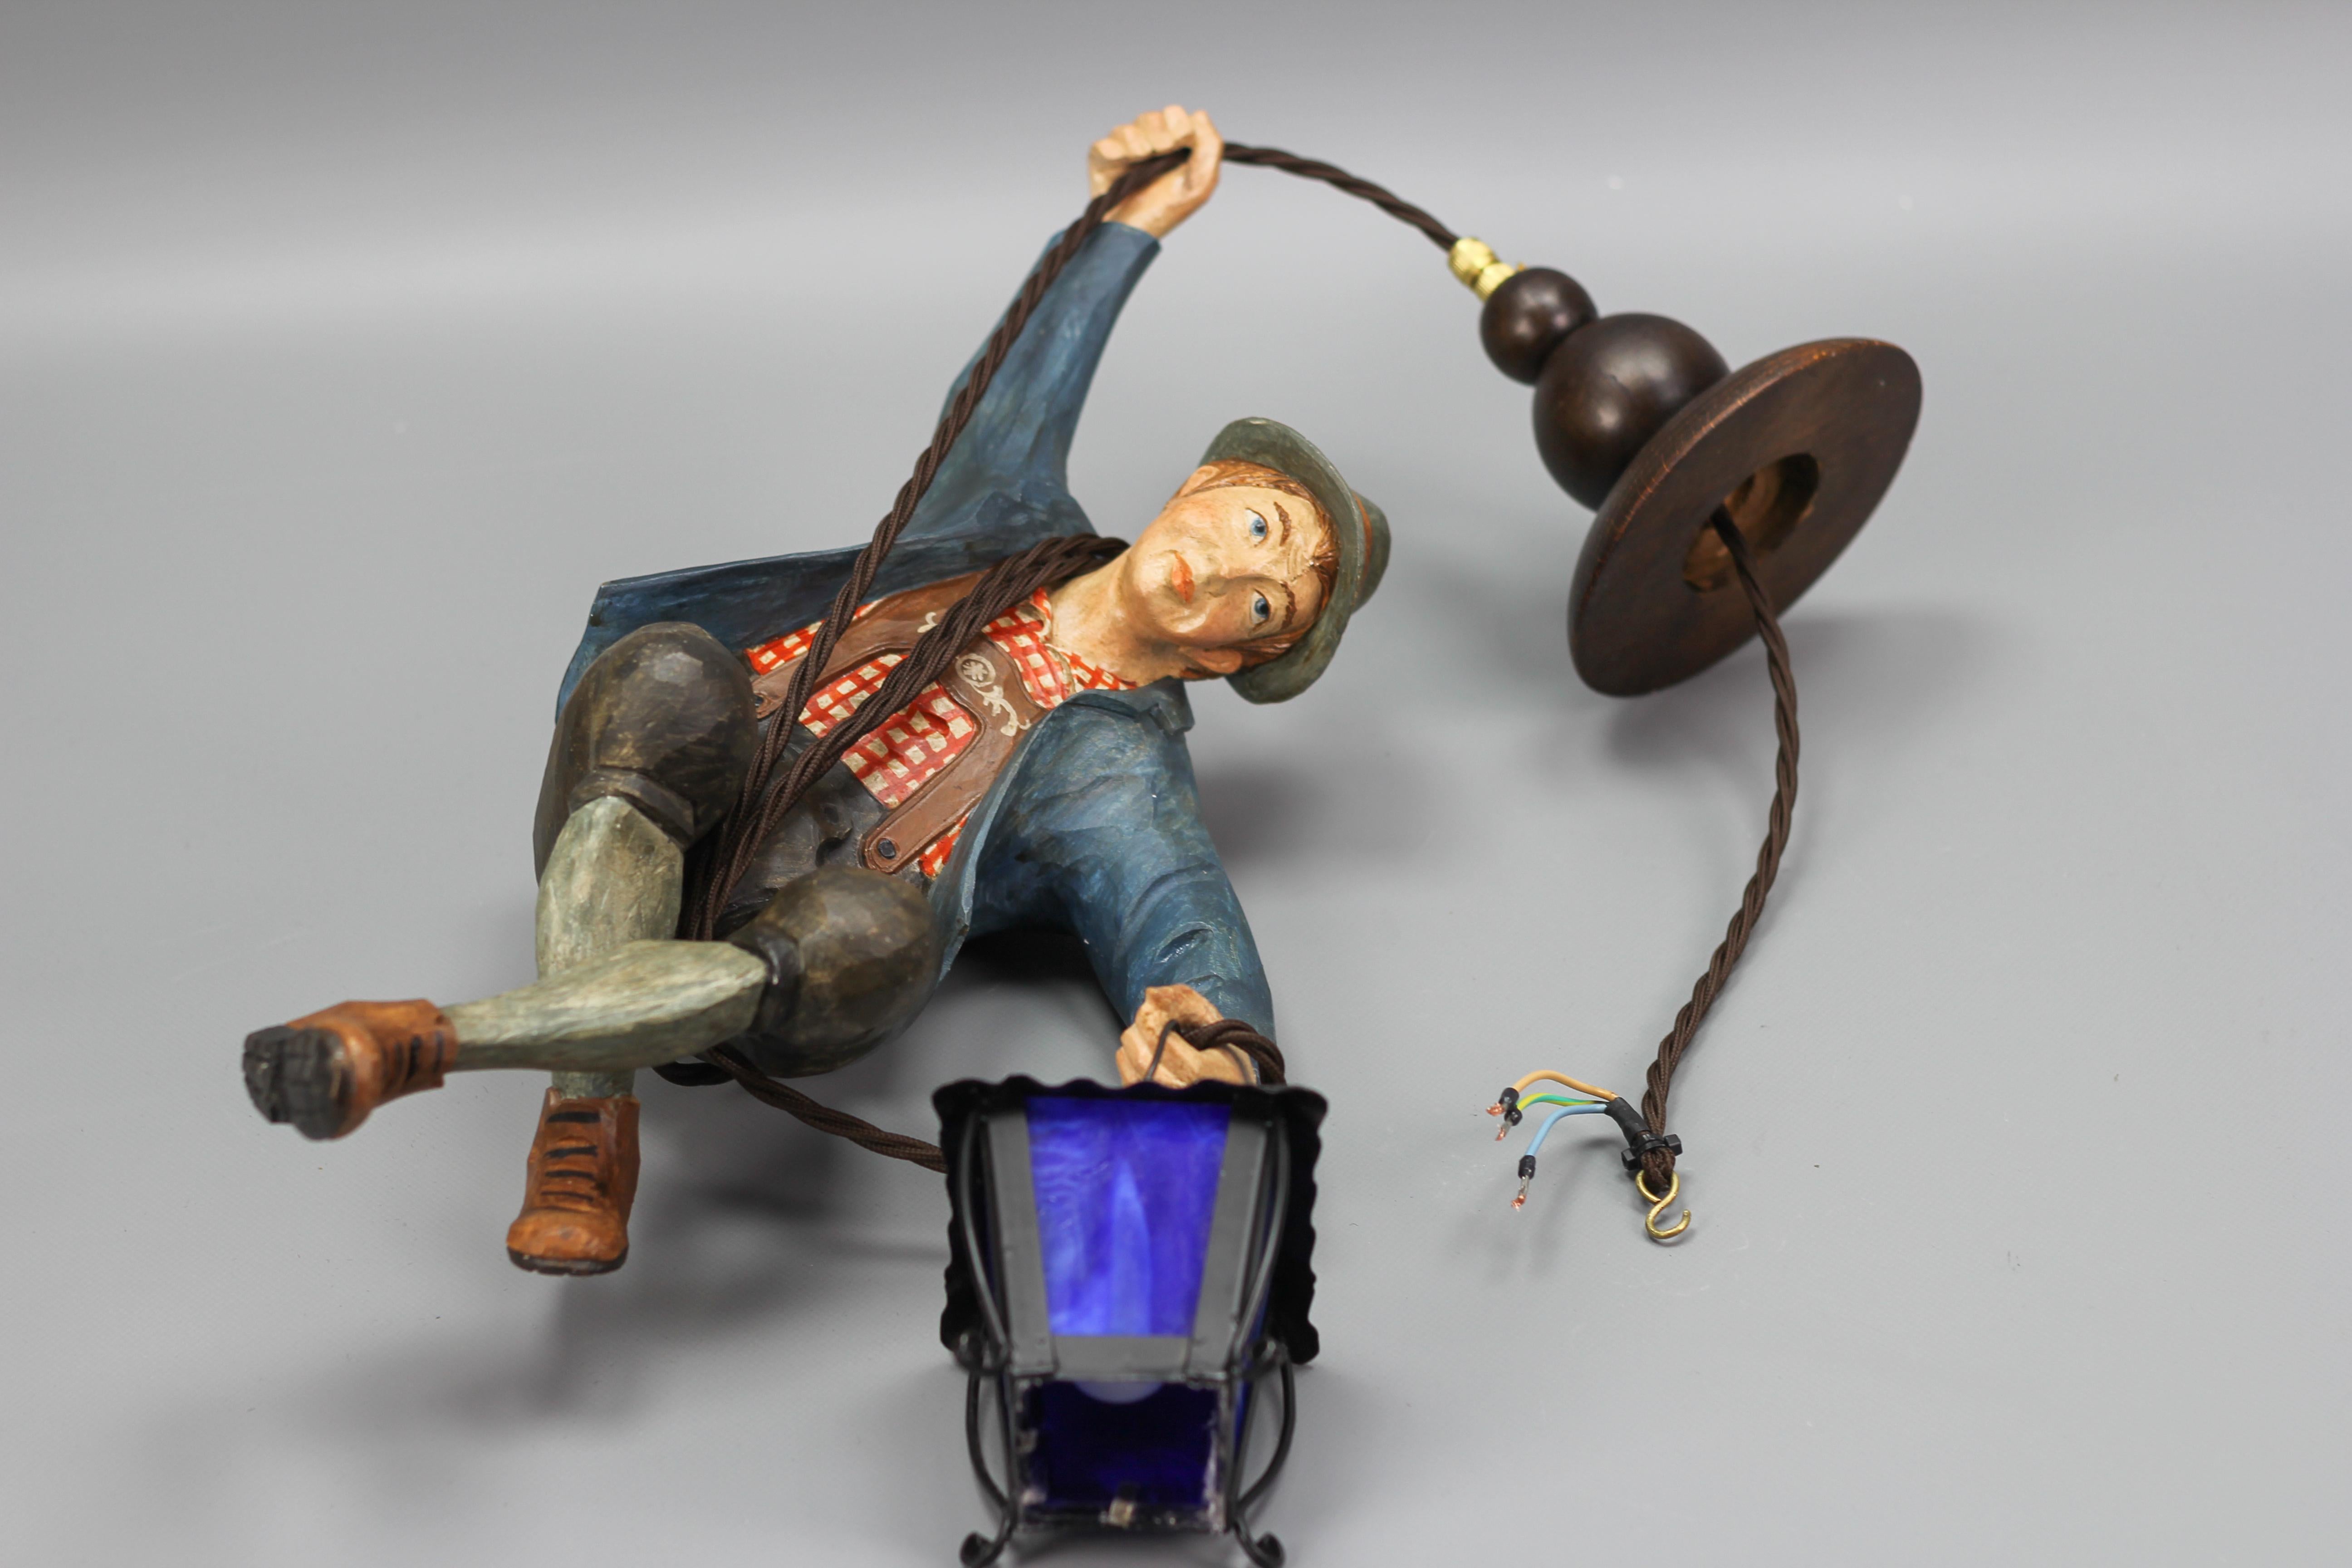 Pendant Light with Figure of a Mountain Climber and a Blue Glass Lantern For Sale 1